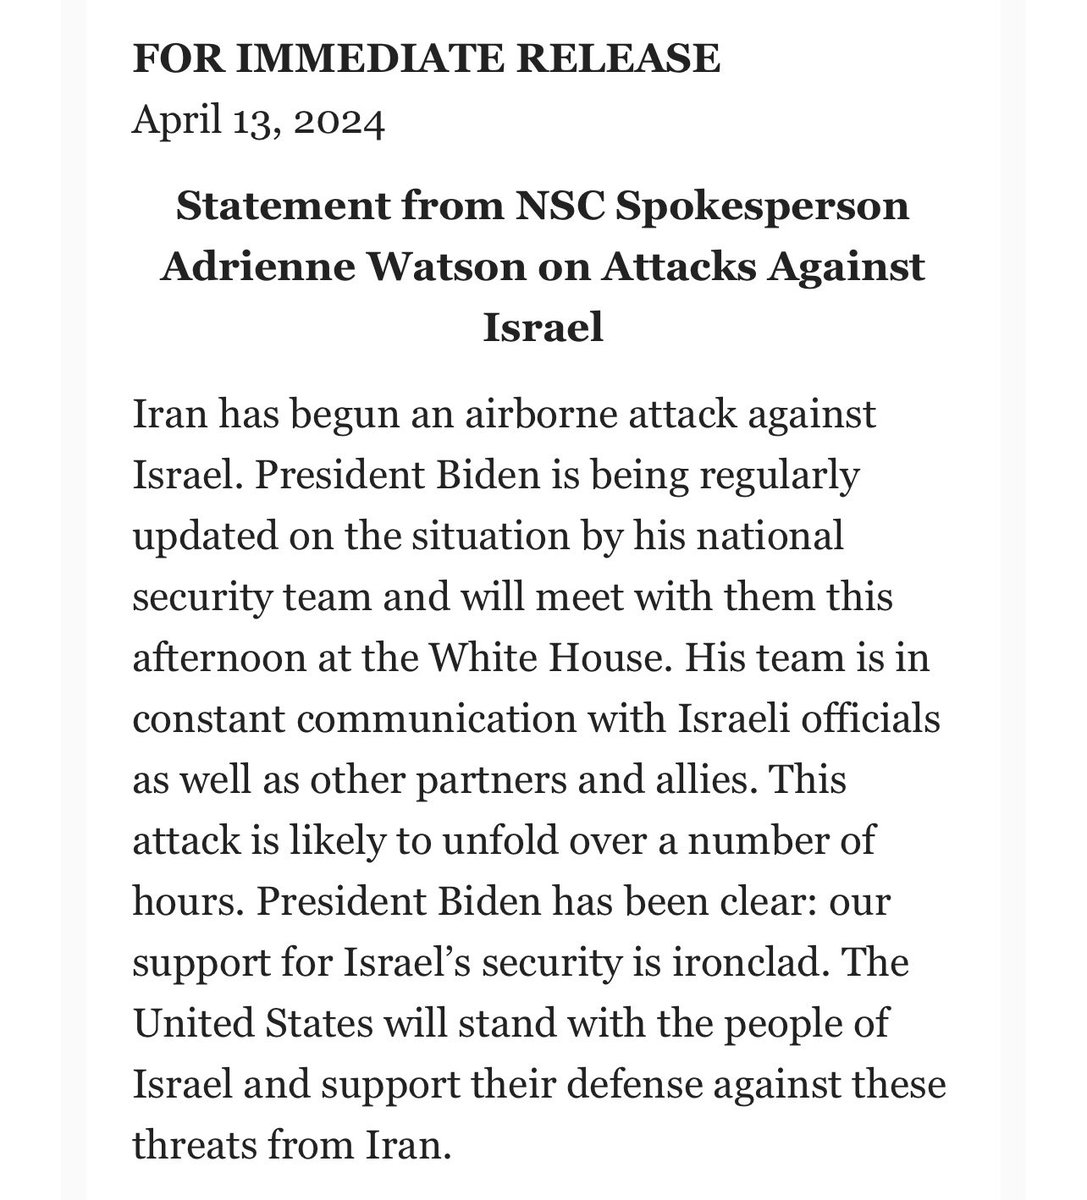 Iran launches dozens of drones against Israel. Here is the NSC’s statement regarding this attack: